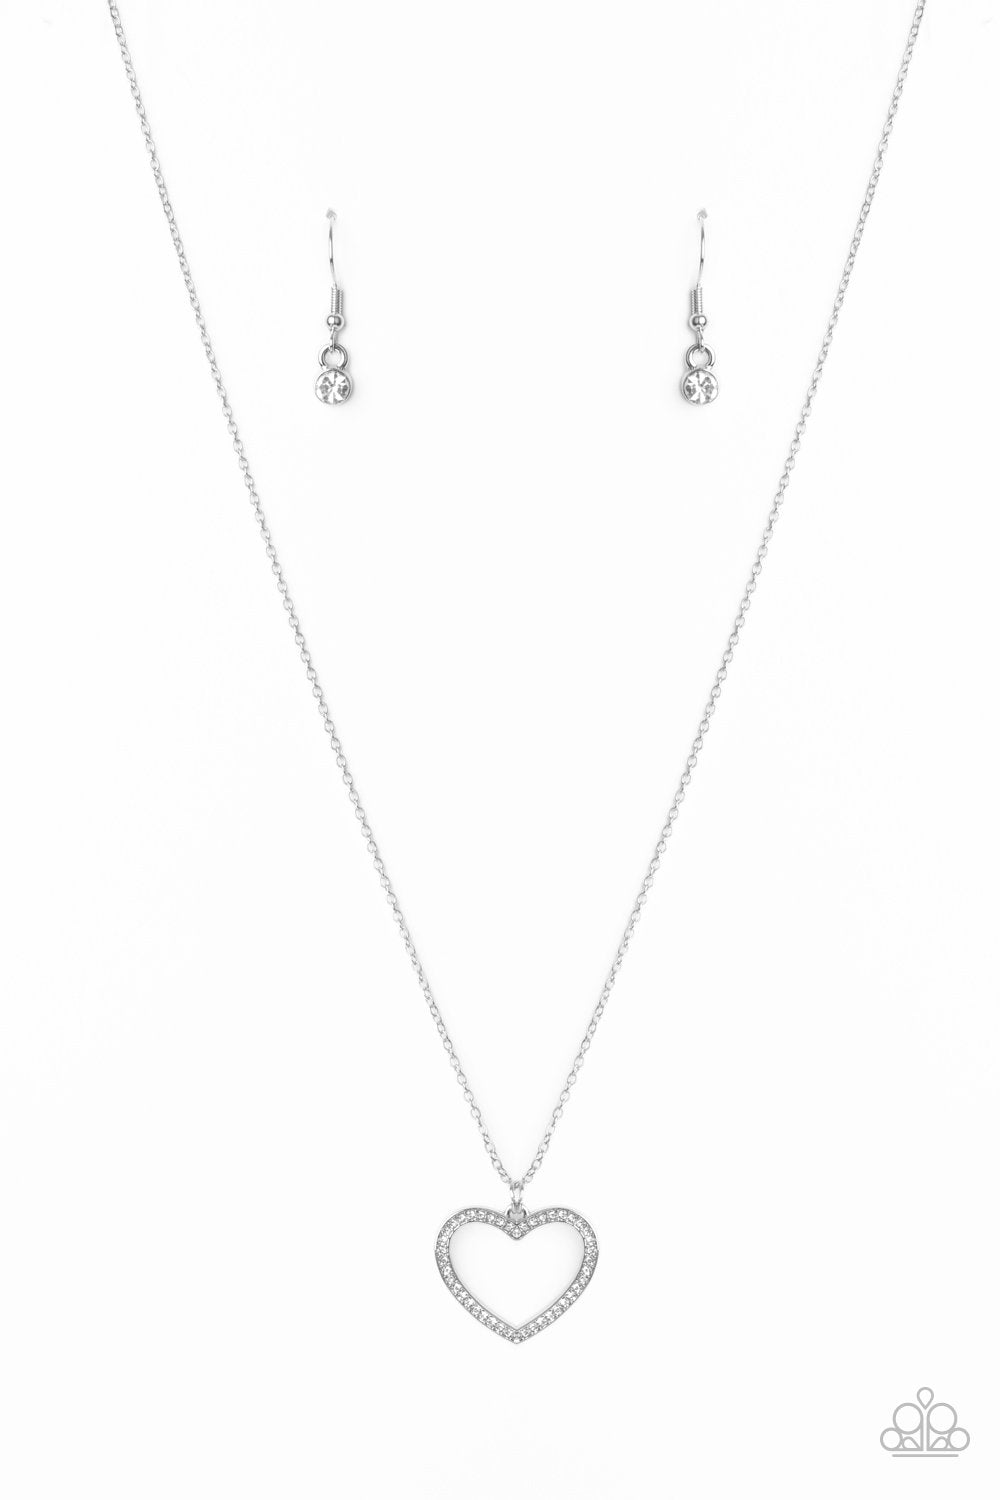 GLOW by Heart White Rhinestone Heart Necklace - Paparazzi Accessories - lightbox -CarasShop.com - $5 Jewelry by Cara Jewels